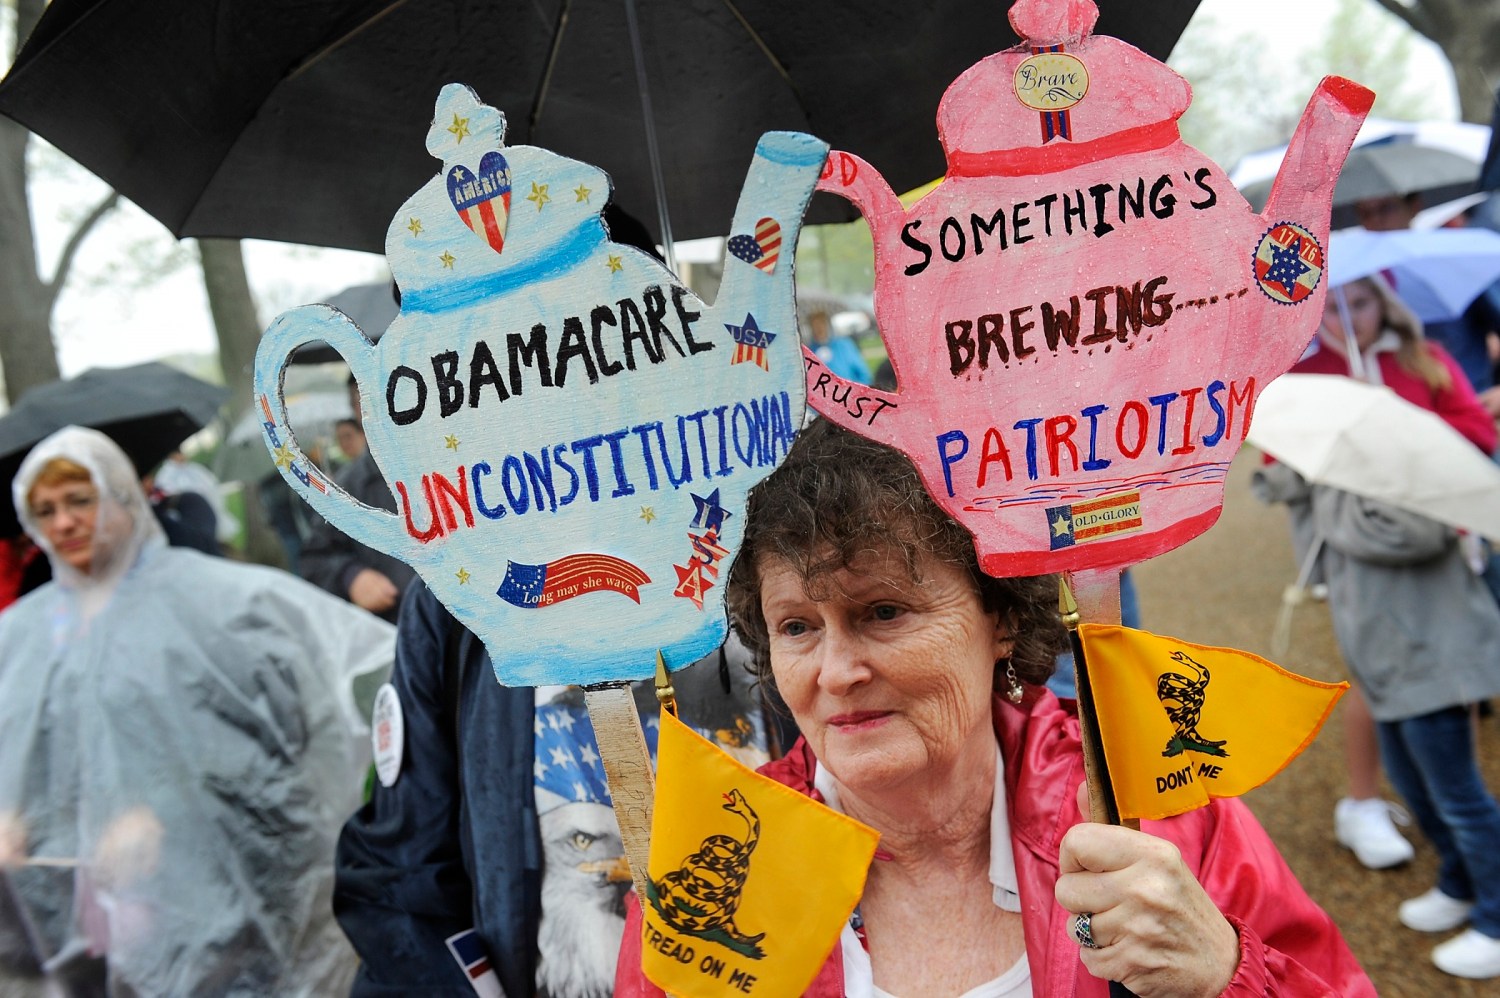 People hold signs at a Tea Party Patriots rally calling for the repeal of the 2010 healthcare law championed by President Barack Obama, on Capitol Hill in Washington, March 24, 2012. The Supreme Court will hear arguments next Monday to Wednesday over the fate of Obama's healthcare law, a battle with legal, political and financial implications for the U.S. healthcare system's biggest overhaul in nearly 50 years. REUTERS/Jonathan Ernst (UNITED STATES - Tags: POLITICS HEALTH CIVIL UNREST) - RTR2ZTA0